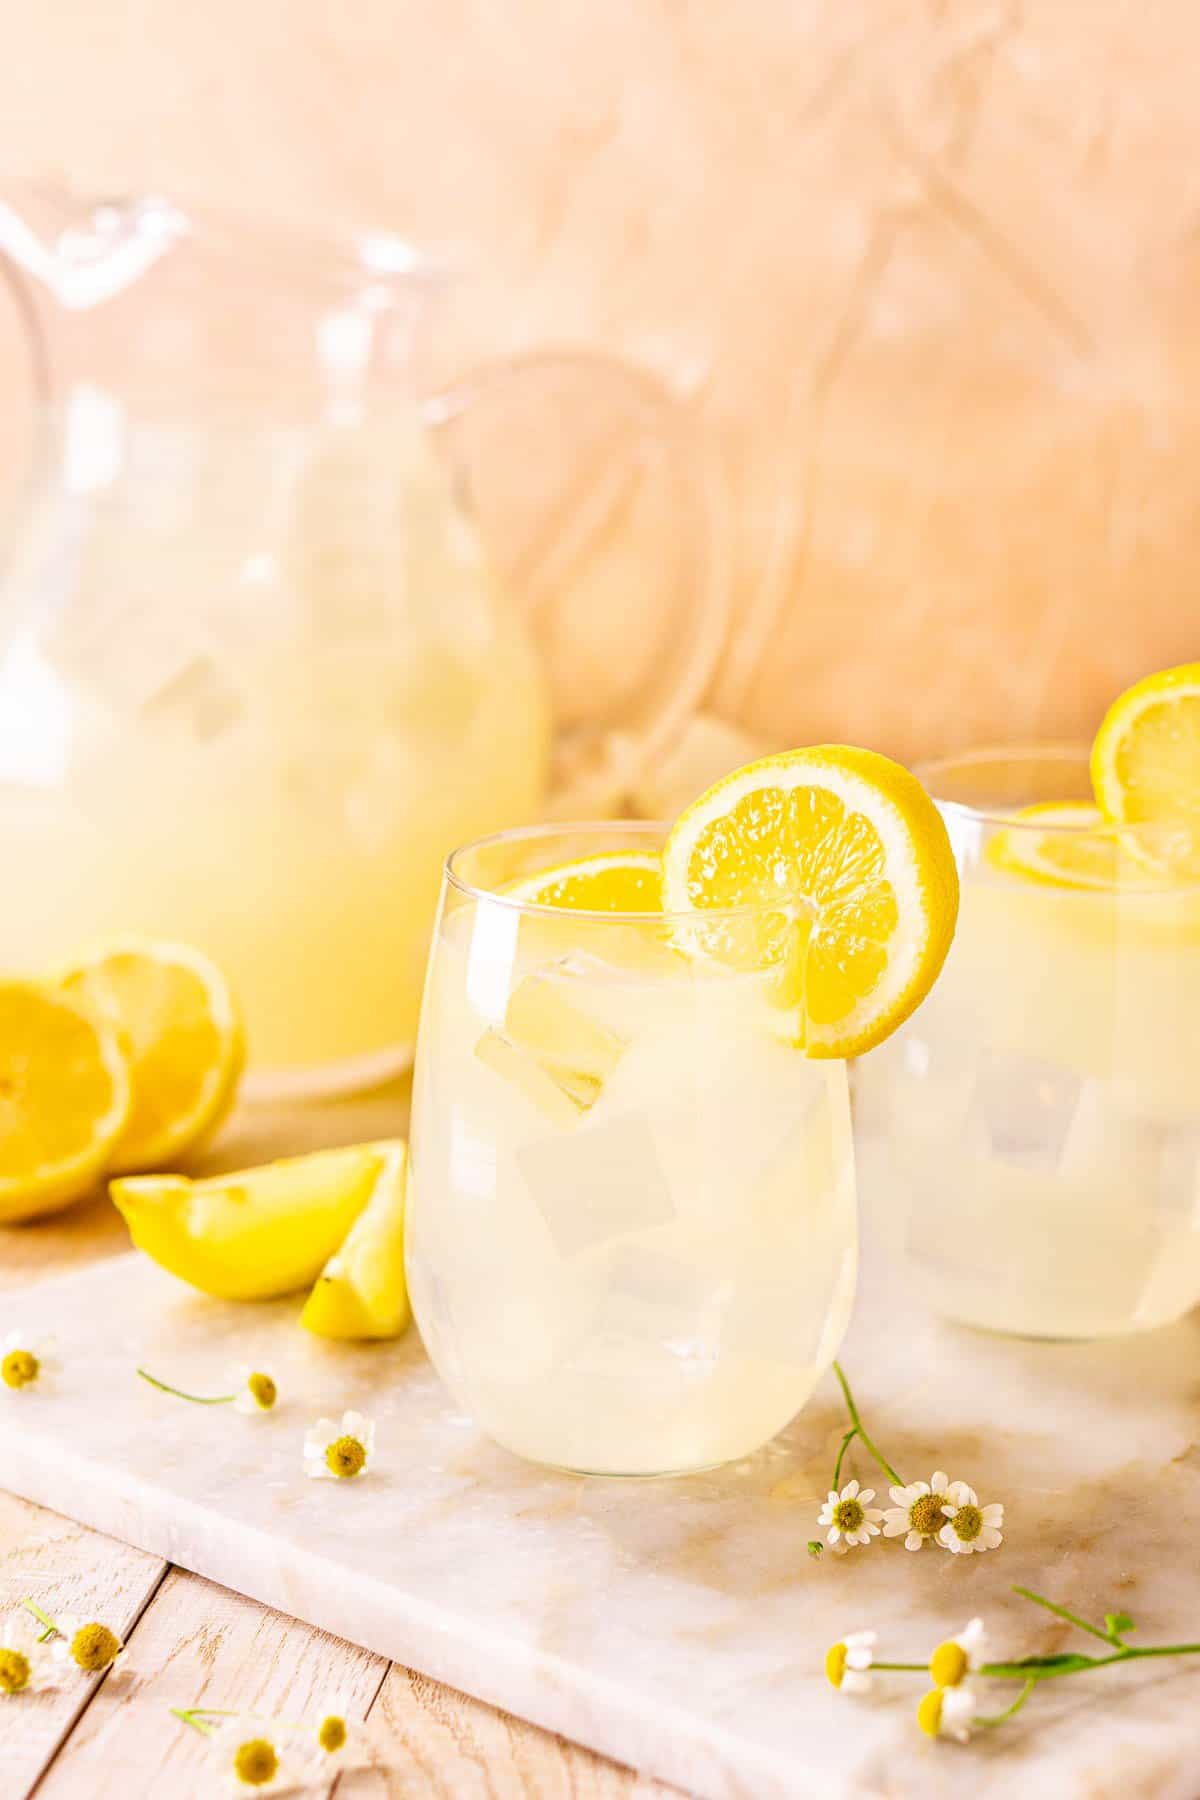 A close-up shot of the tequila lemonade with white flowers around it.